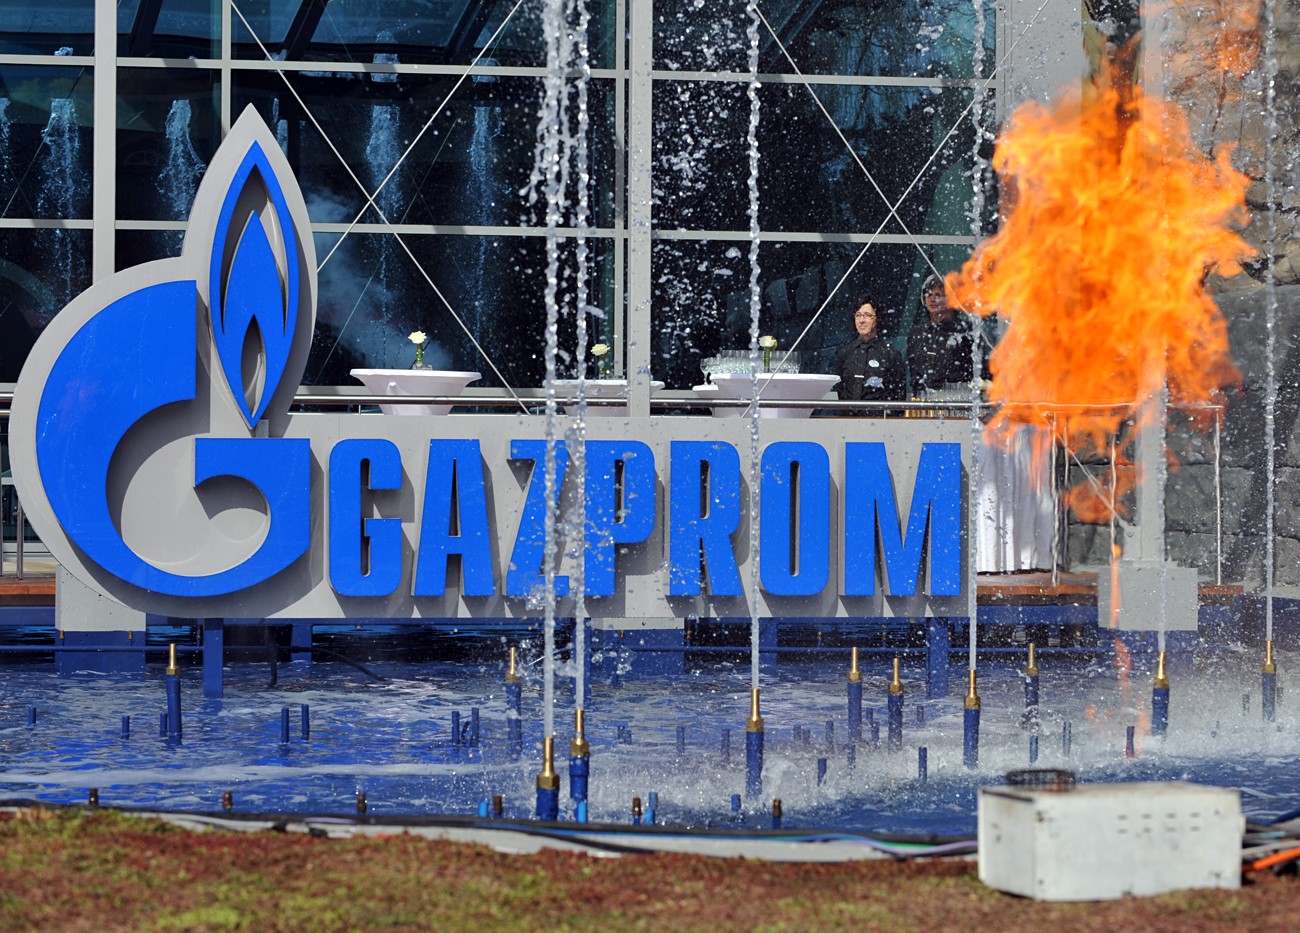 Georgia ceased purchasing gas from Gazprom in 2007.